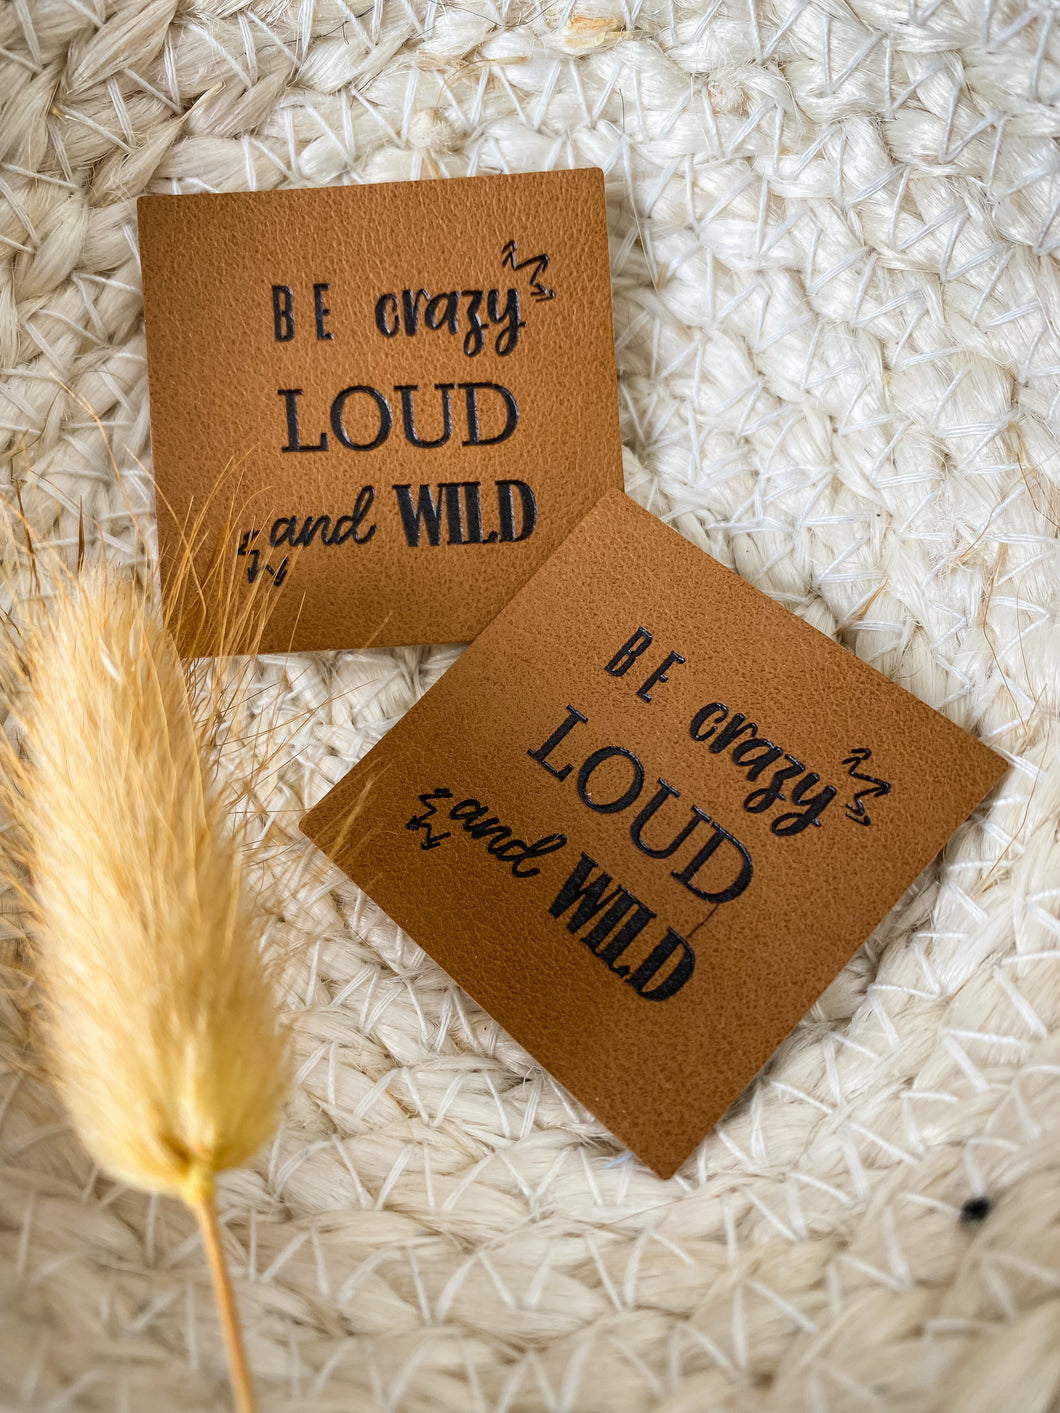 Be crazy Loud and Wild Label